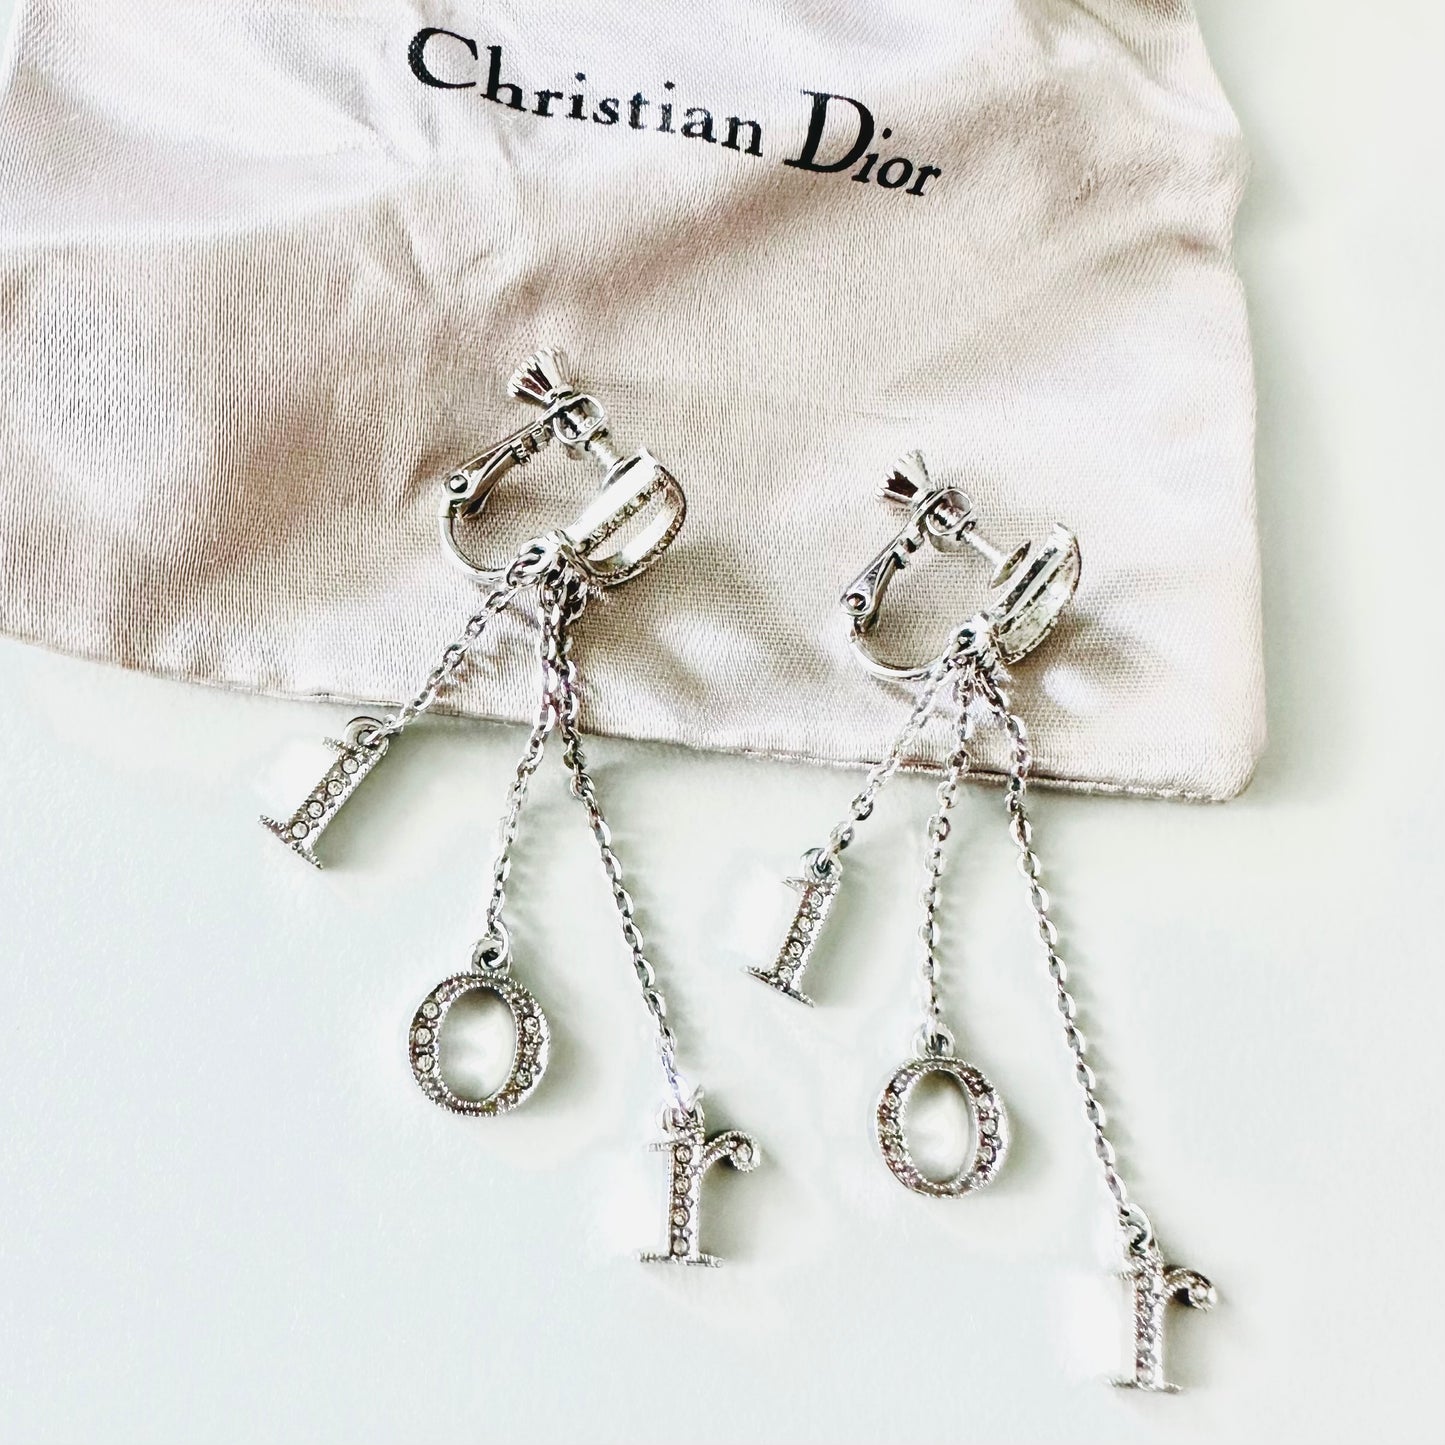 Christian Dior CD Monogram Logo Signature Classic Silver & Crystals Dangling Clip On Earrings